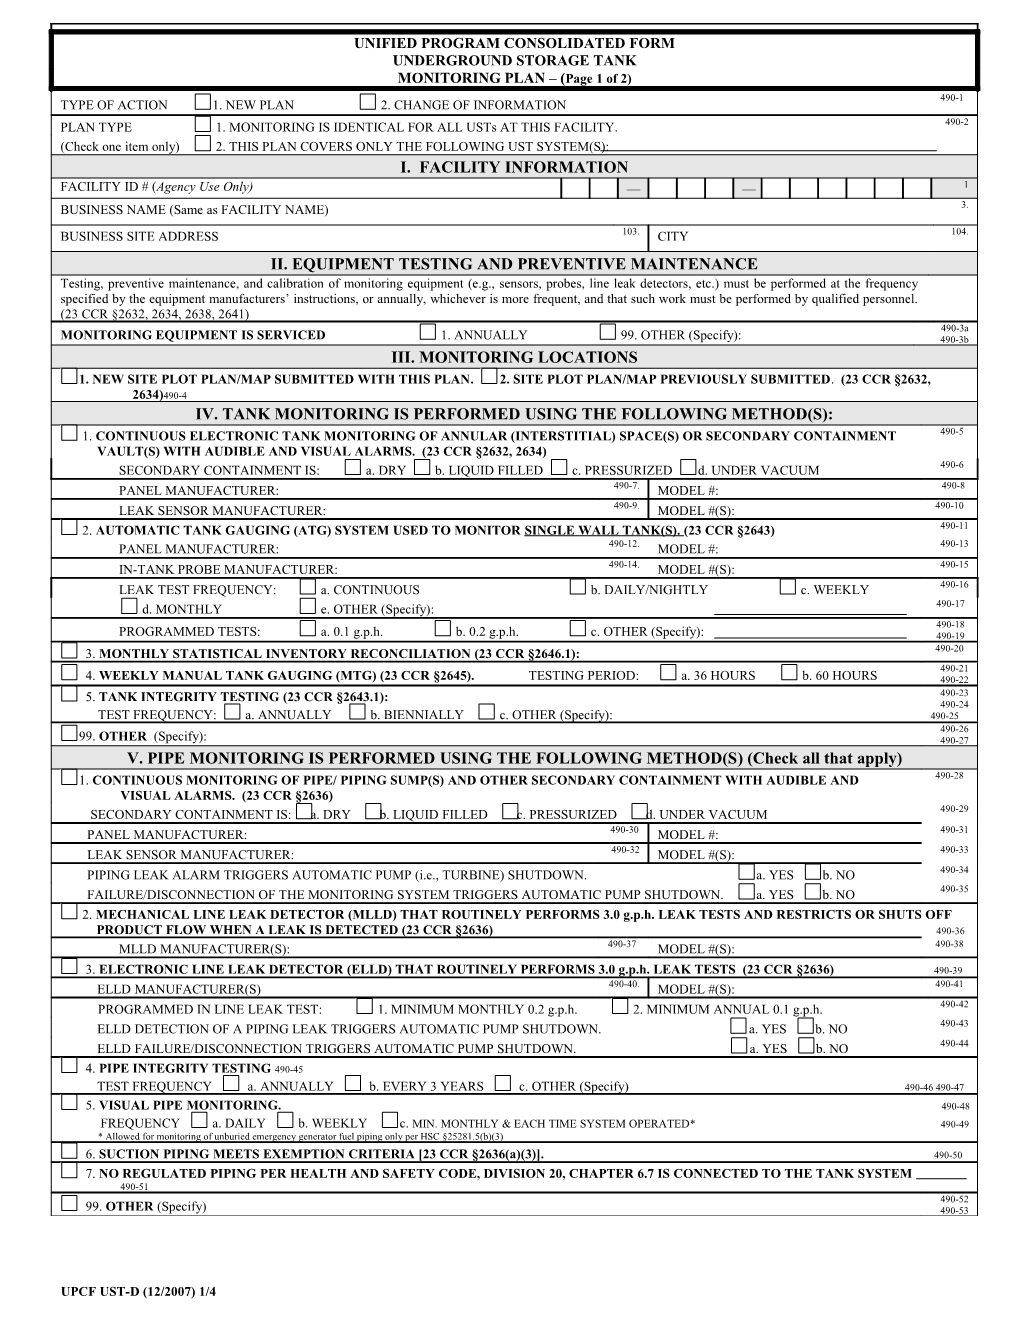 Unified Program Consolidated Form